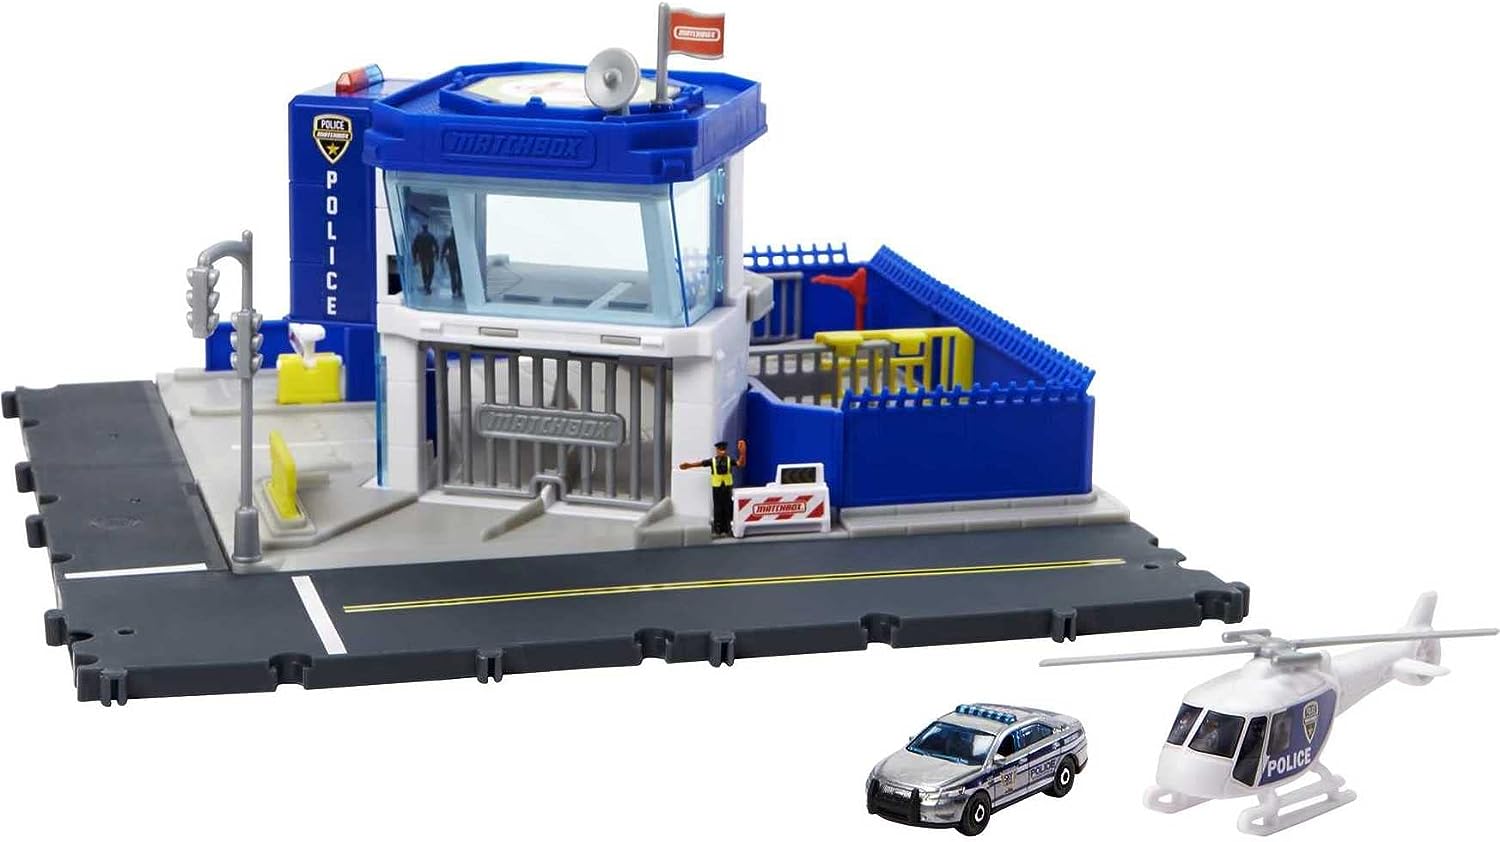 Back in Stock: Matchbox Action Drivers Police Station Dispatch Playset $9 + F/S w/ Prime or on Orders $35+